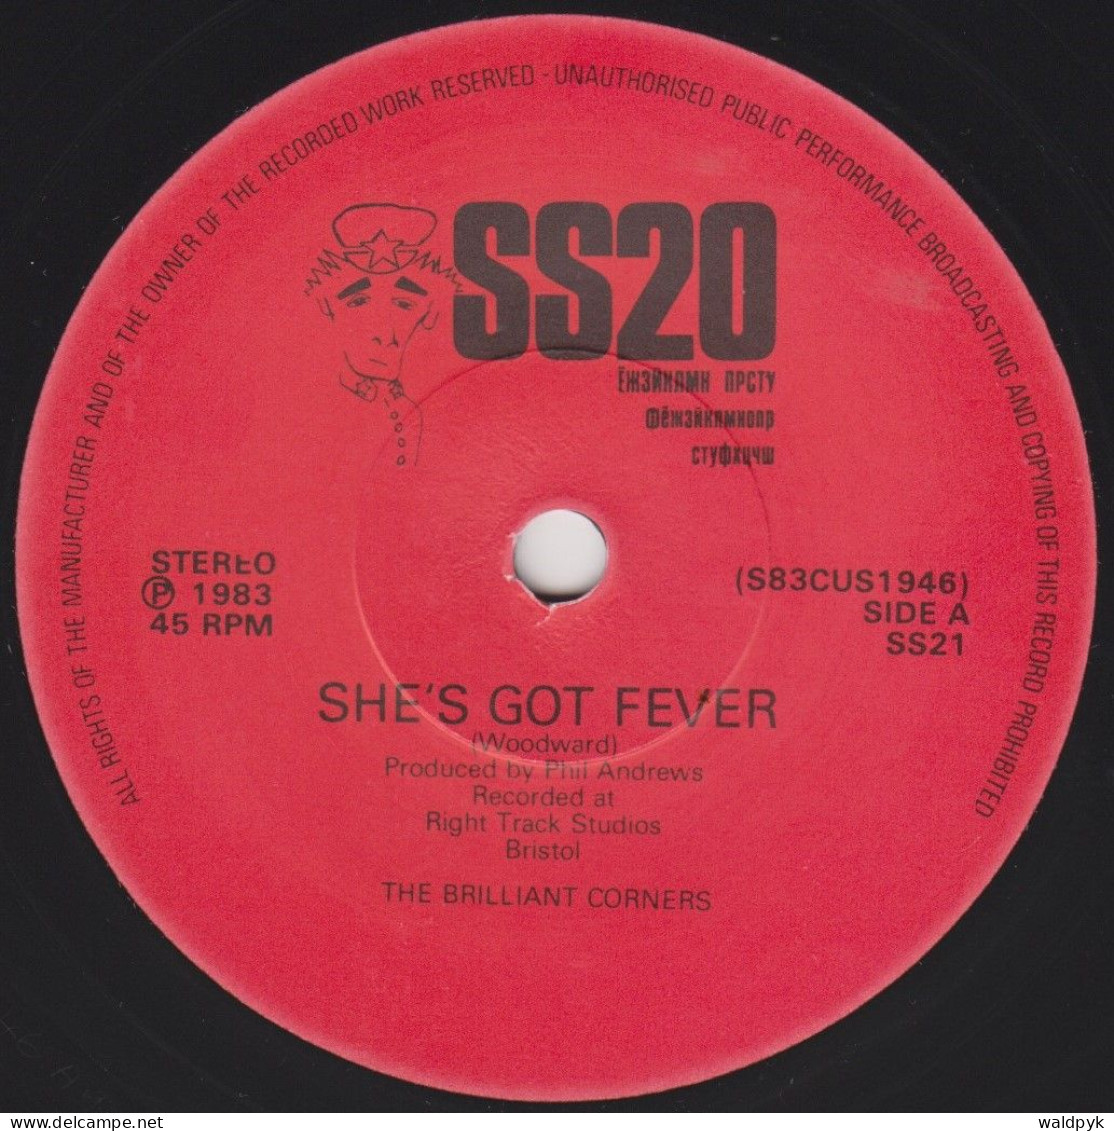 THE BRILLIANT CORNERS - She's Got Fever - Other - English Music